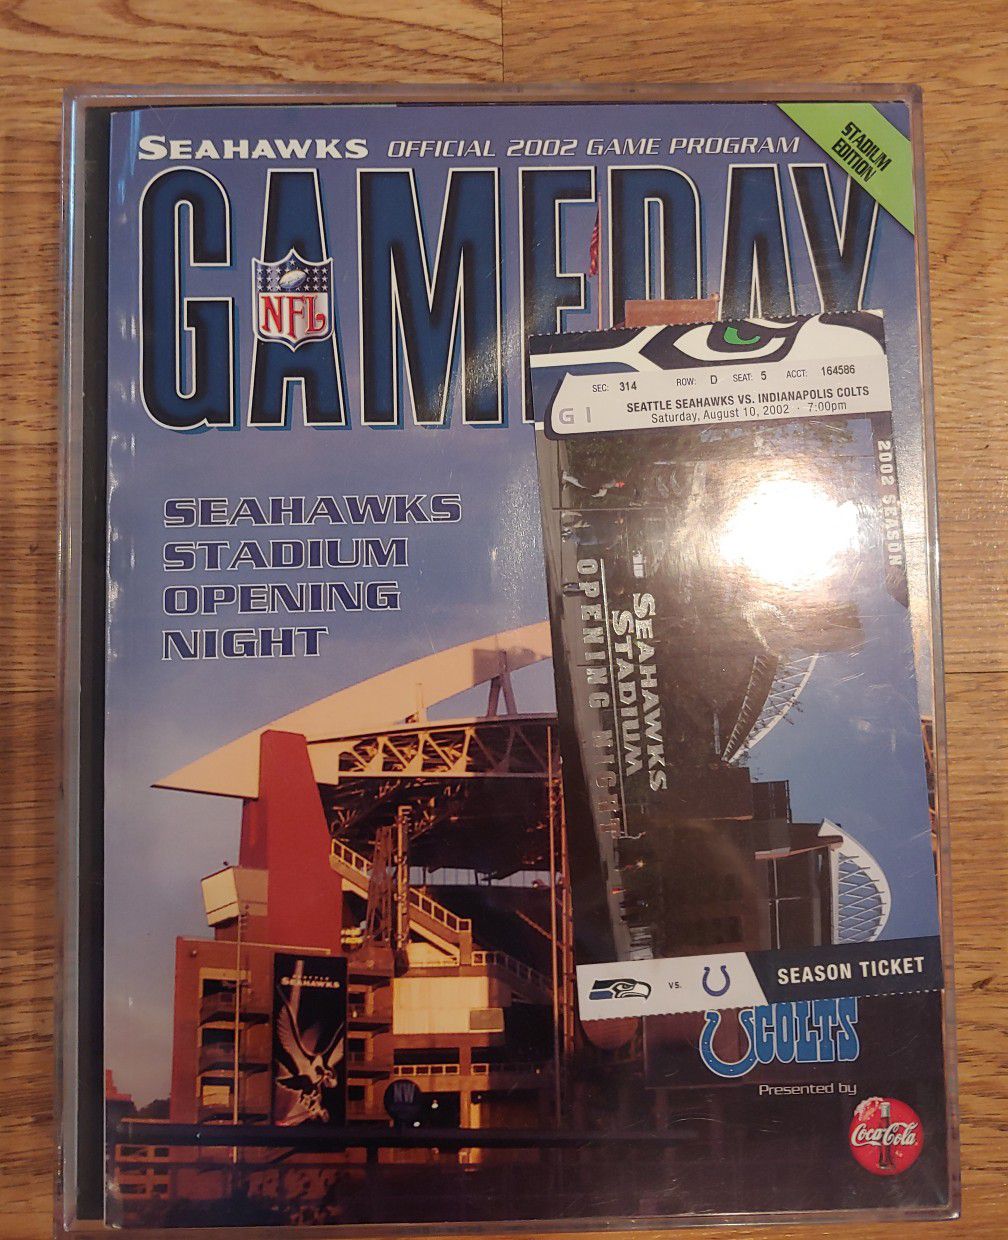 2002 seahawks ticket with brochure frames